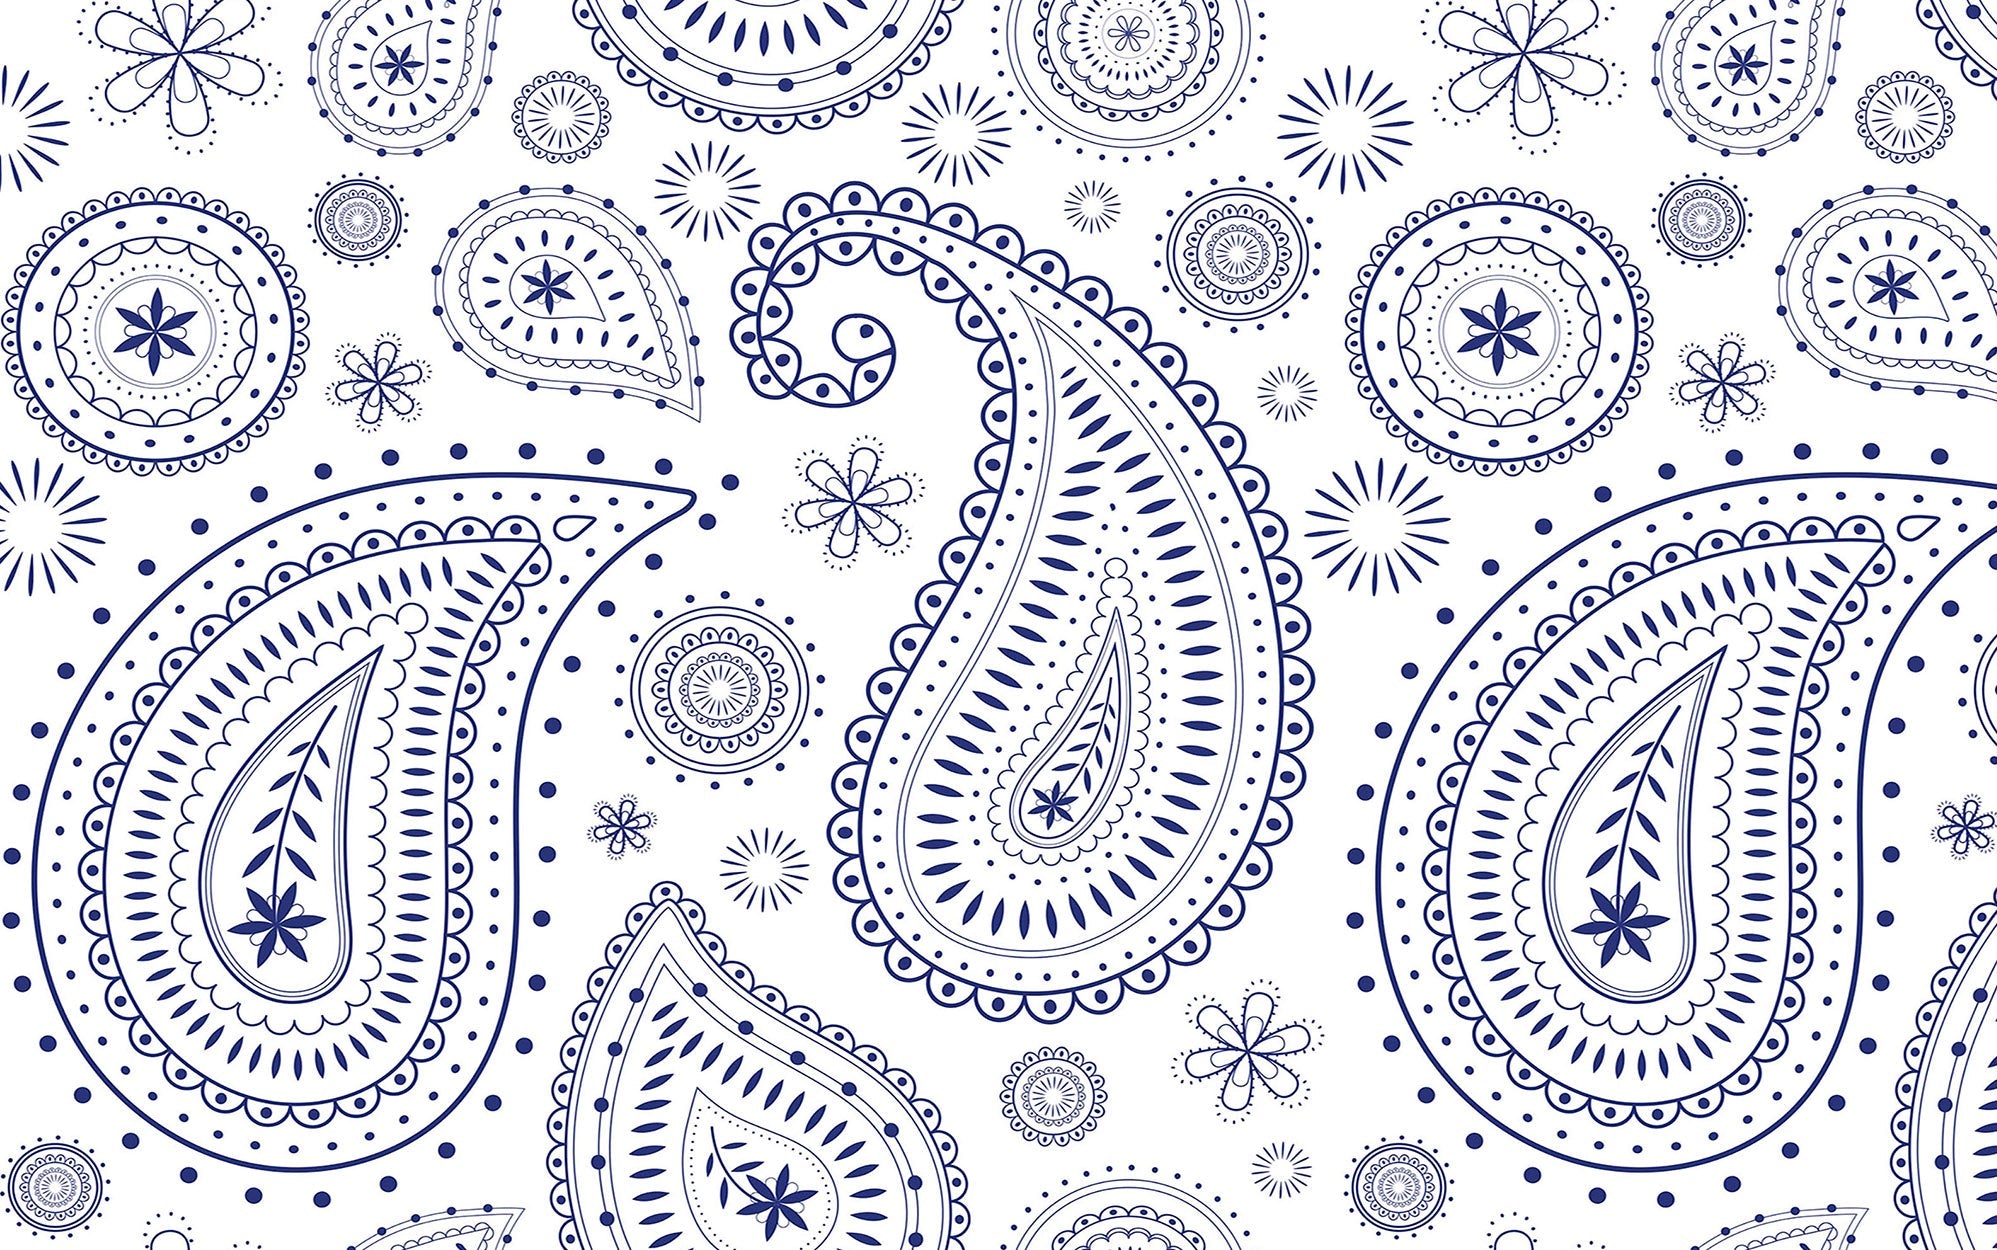 Intricate blue paisley pattern on a white wall mural in an interior setting